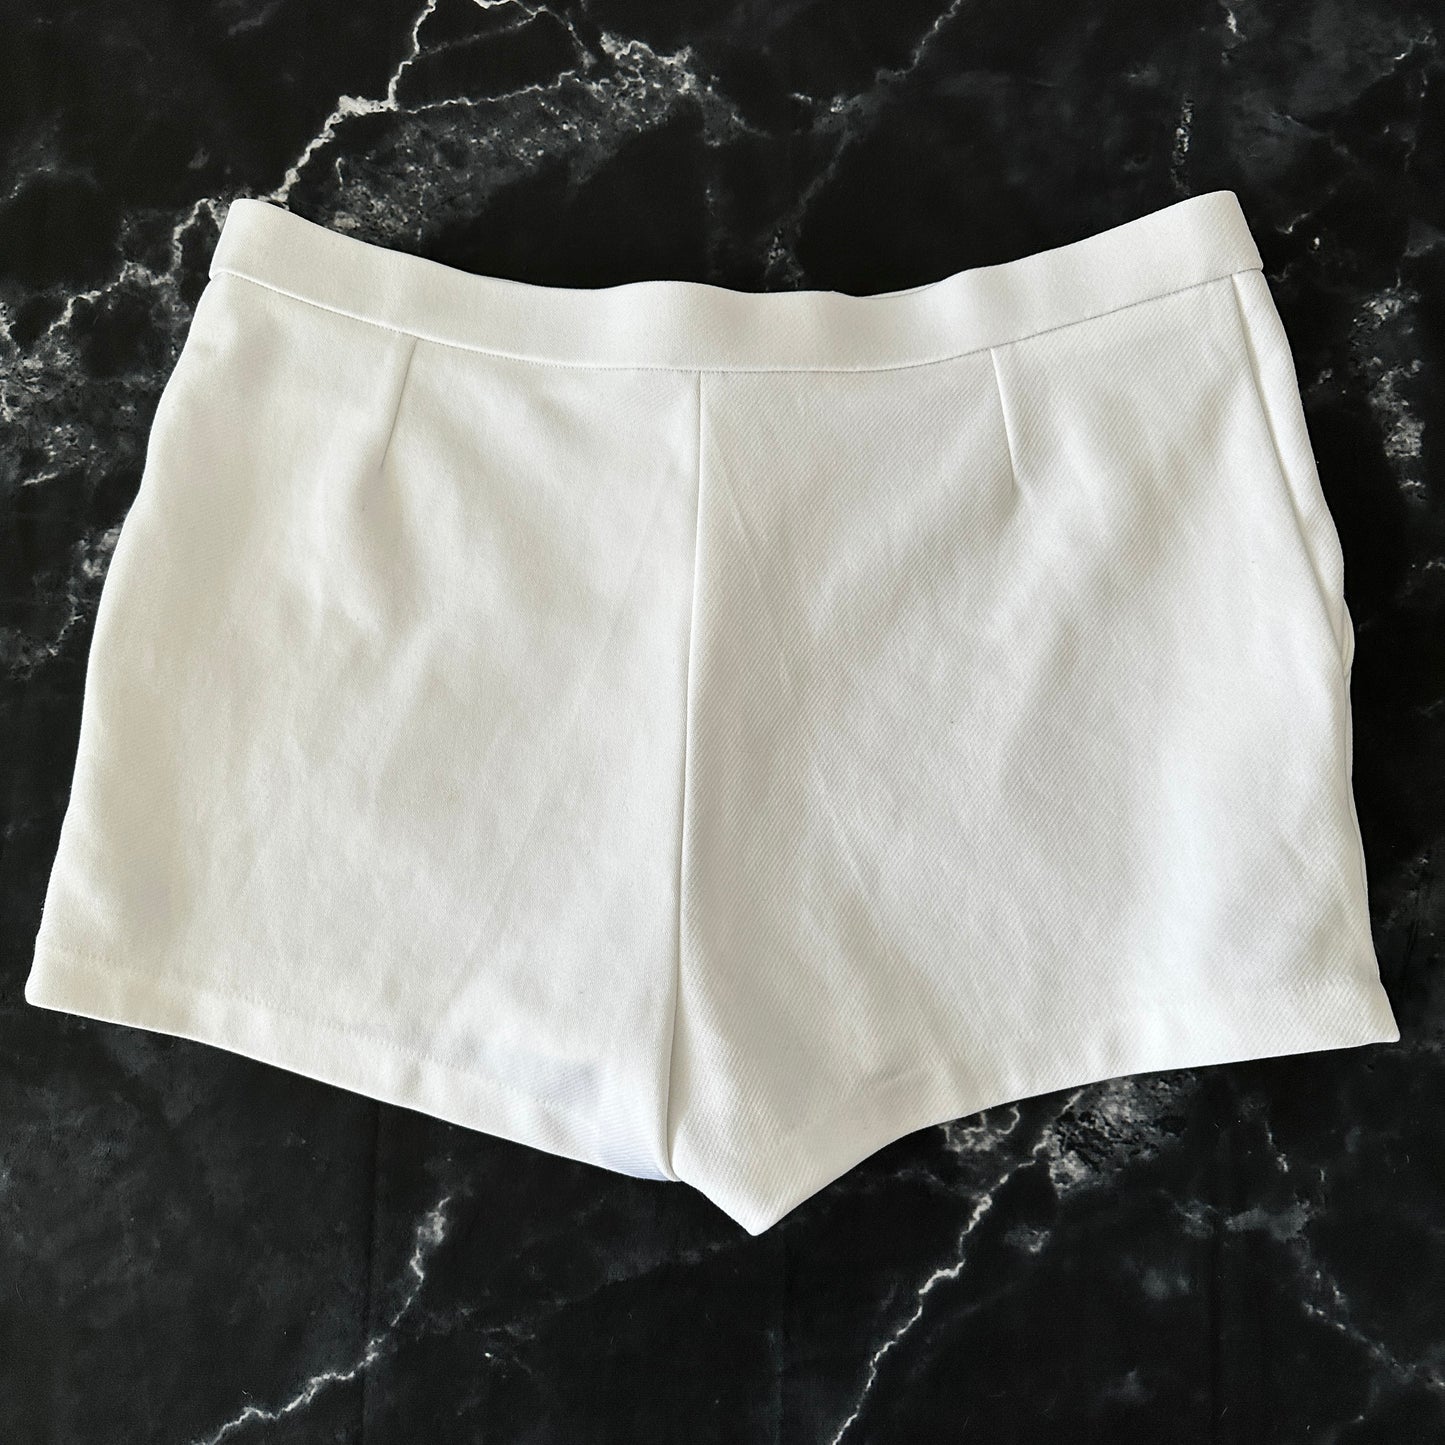 Lacoste Vintage 80s Tennis Shorts - White - 50 - Made in France